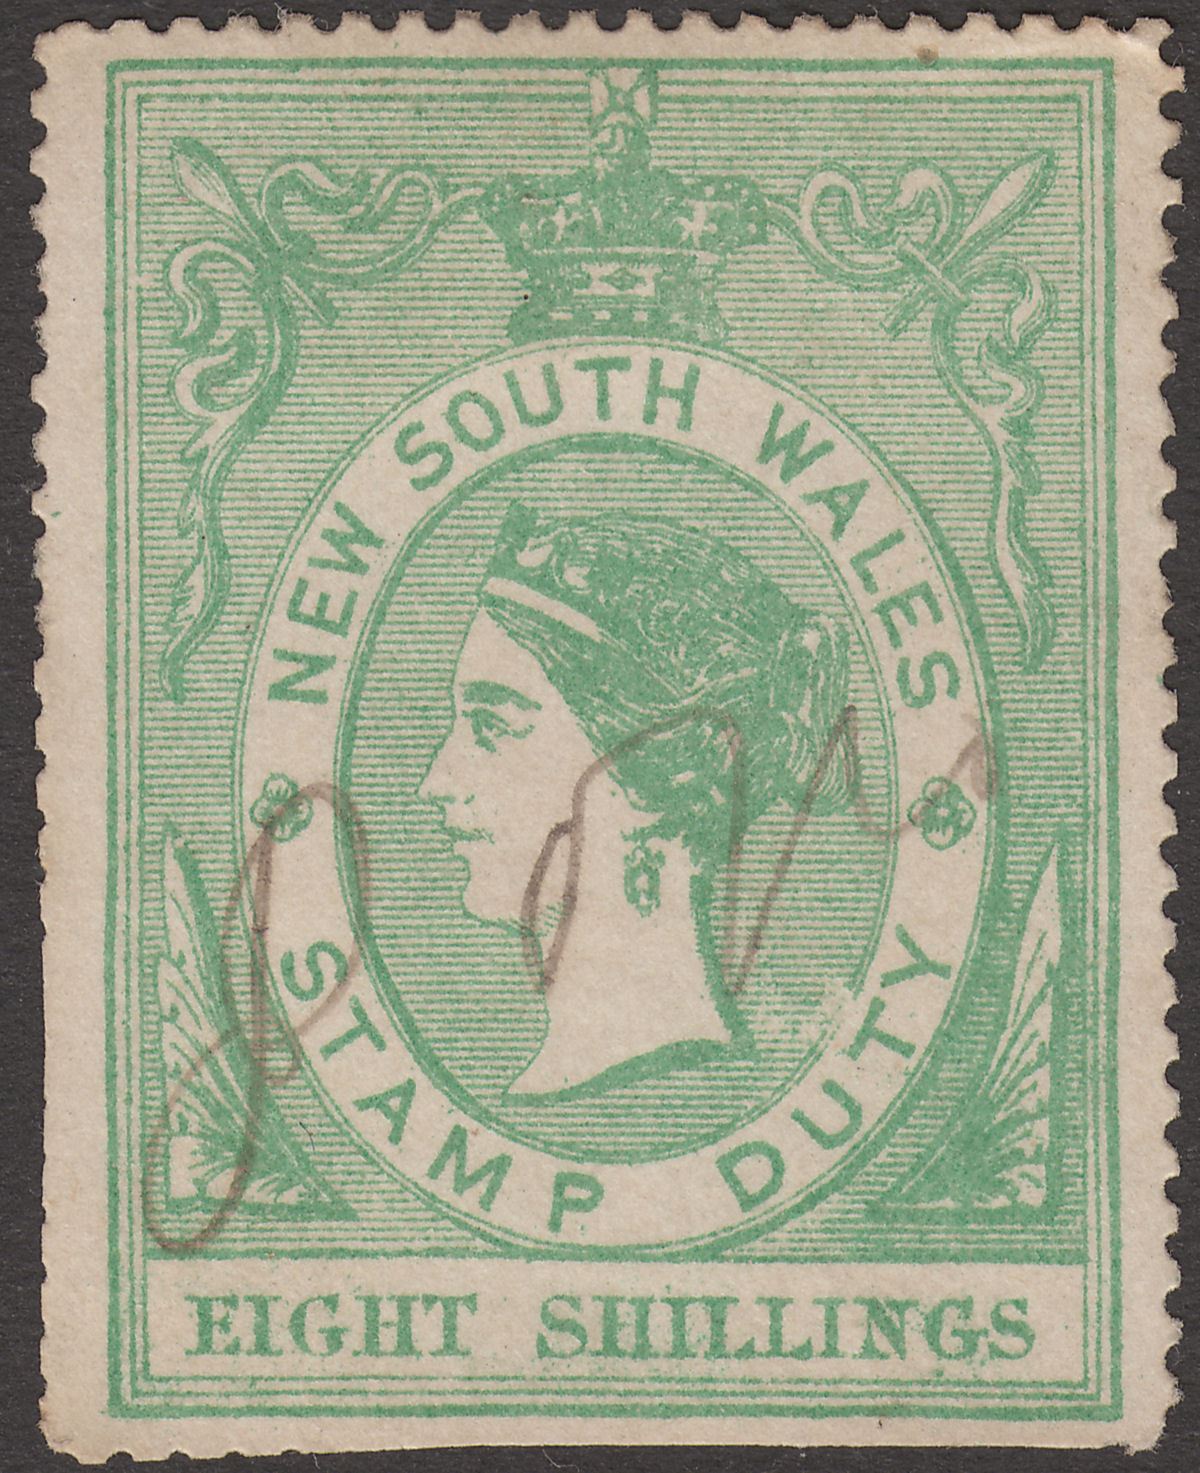 New South Wales 1866 QV Revenue Stamp Duty 8sh Green Used BF14